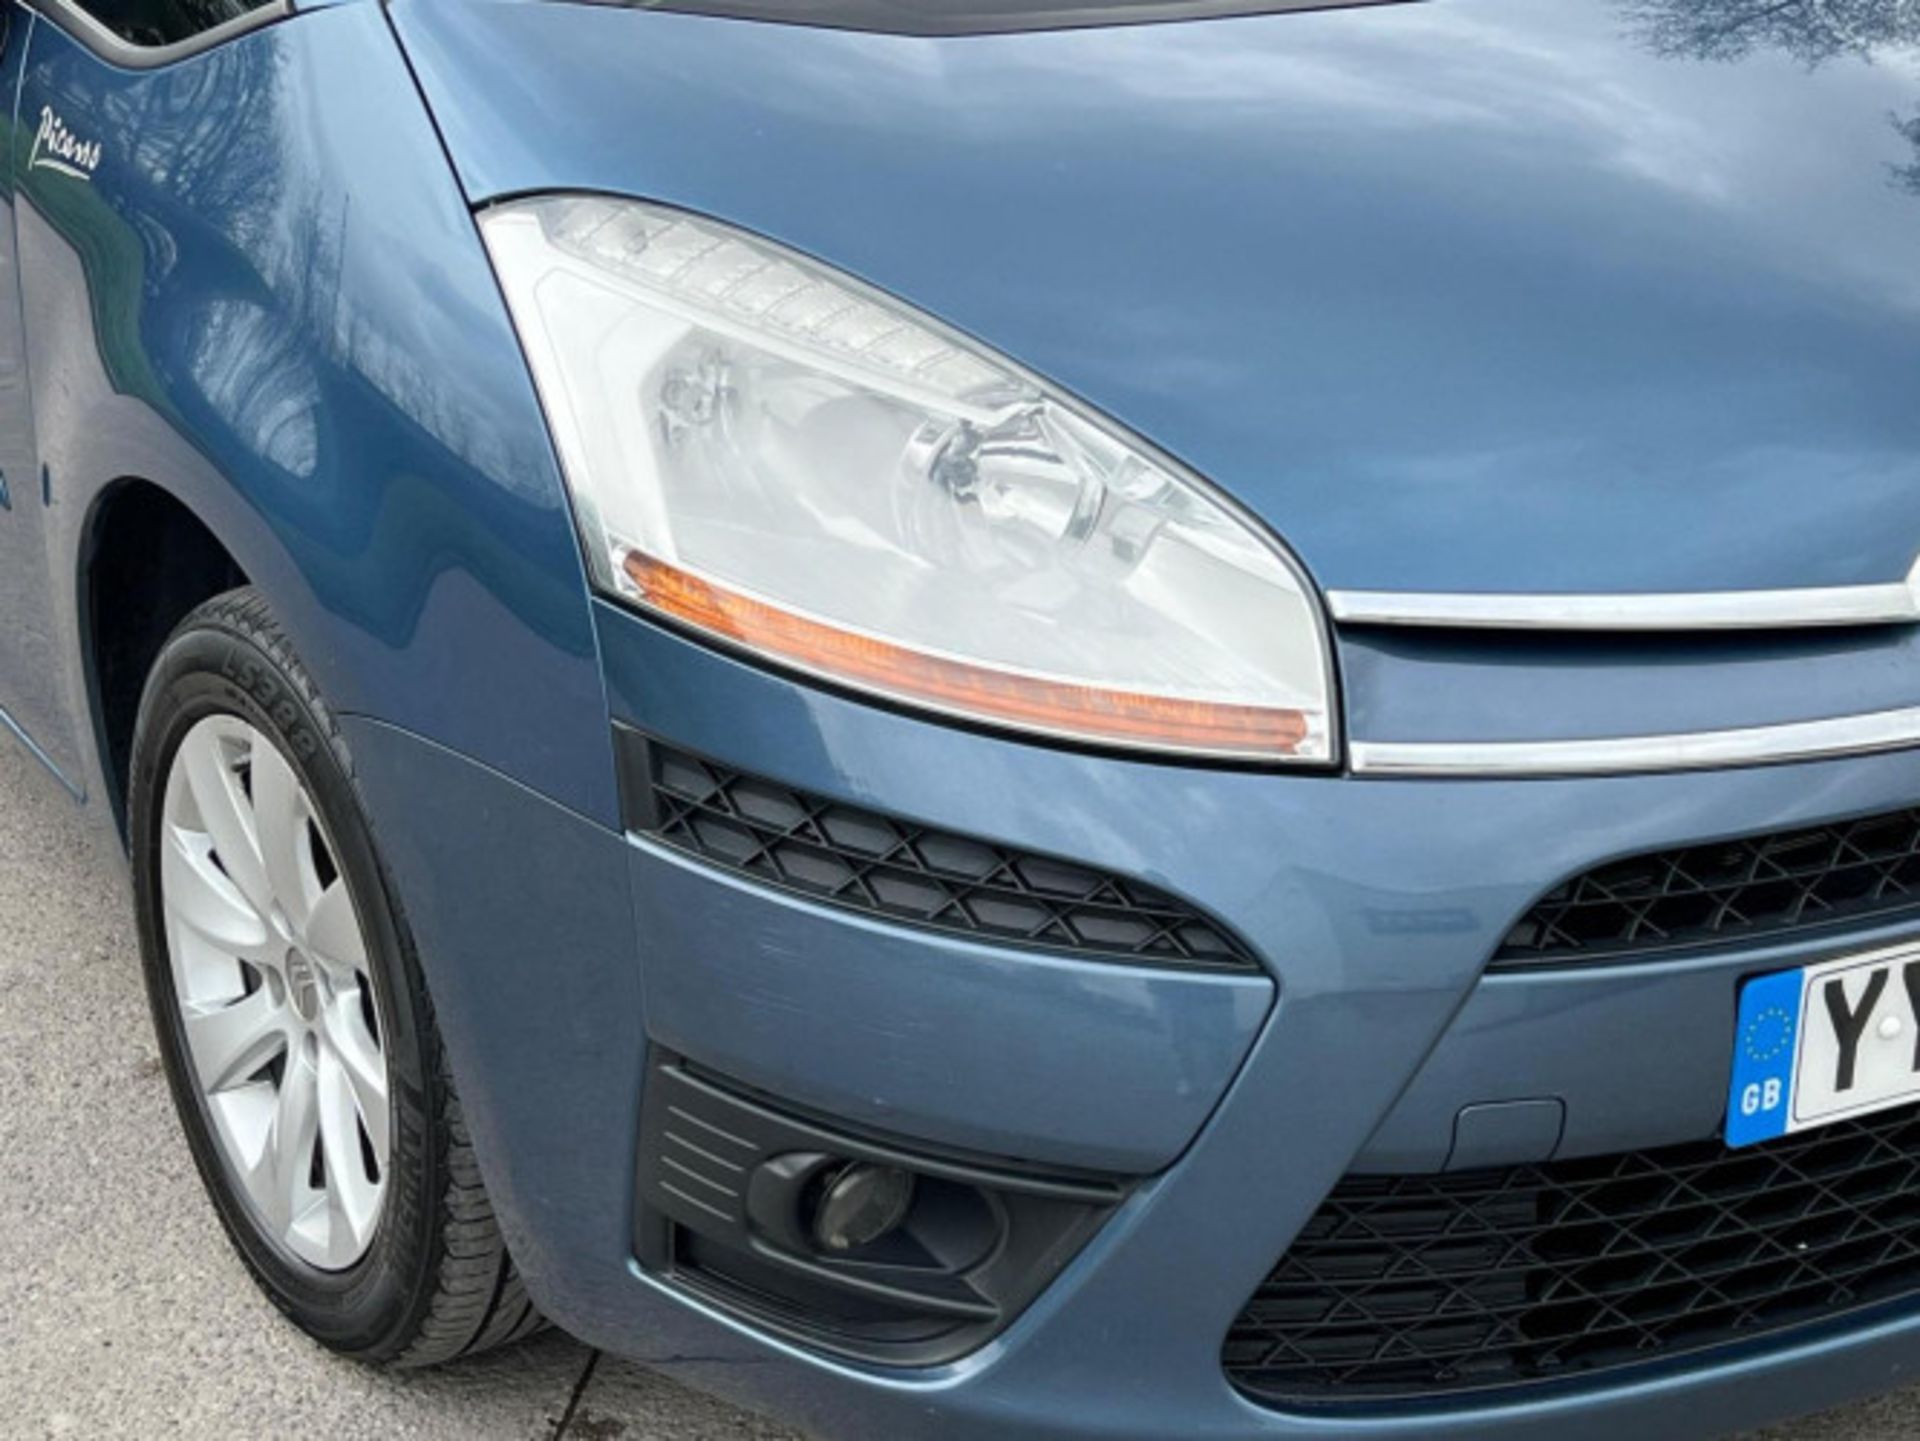 2009 CITROEN C4 PICASSO 1.6 HDI VTR+ EGS6 5DR >>--NO VAT ON HAMMER--<< - Image 96 of 123